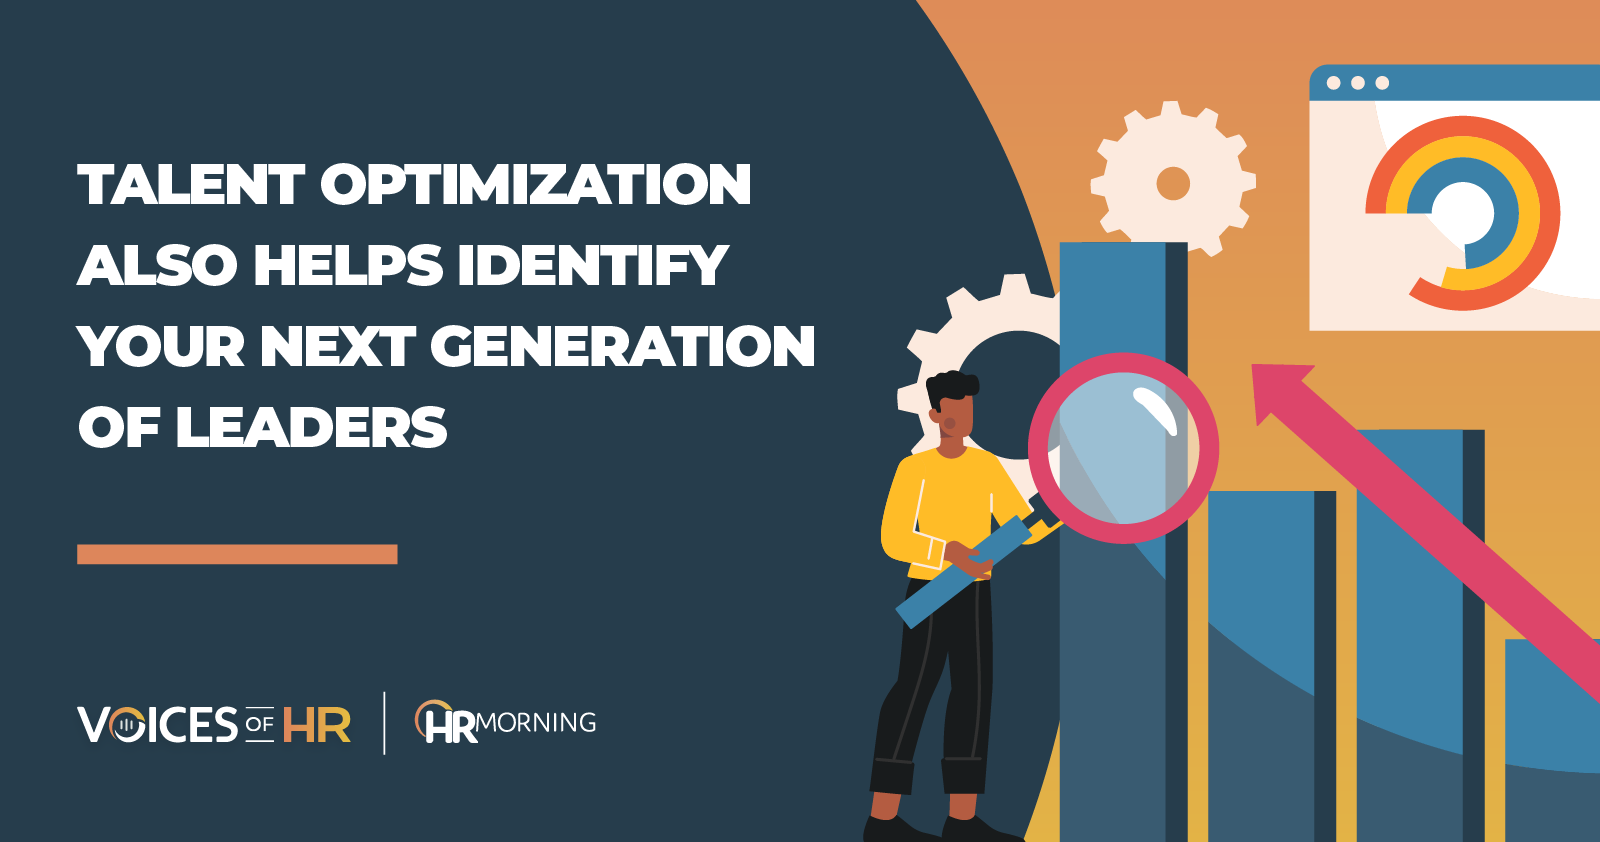 Talent optimization also helps identify your next generation of leaders